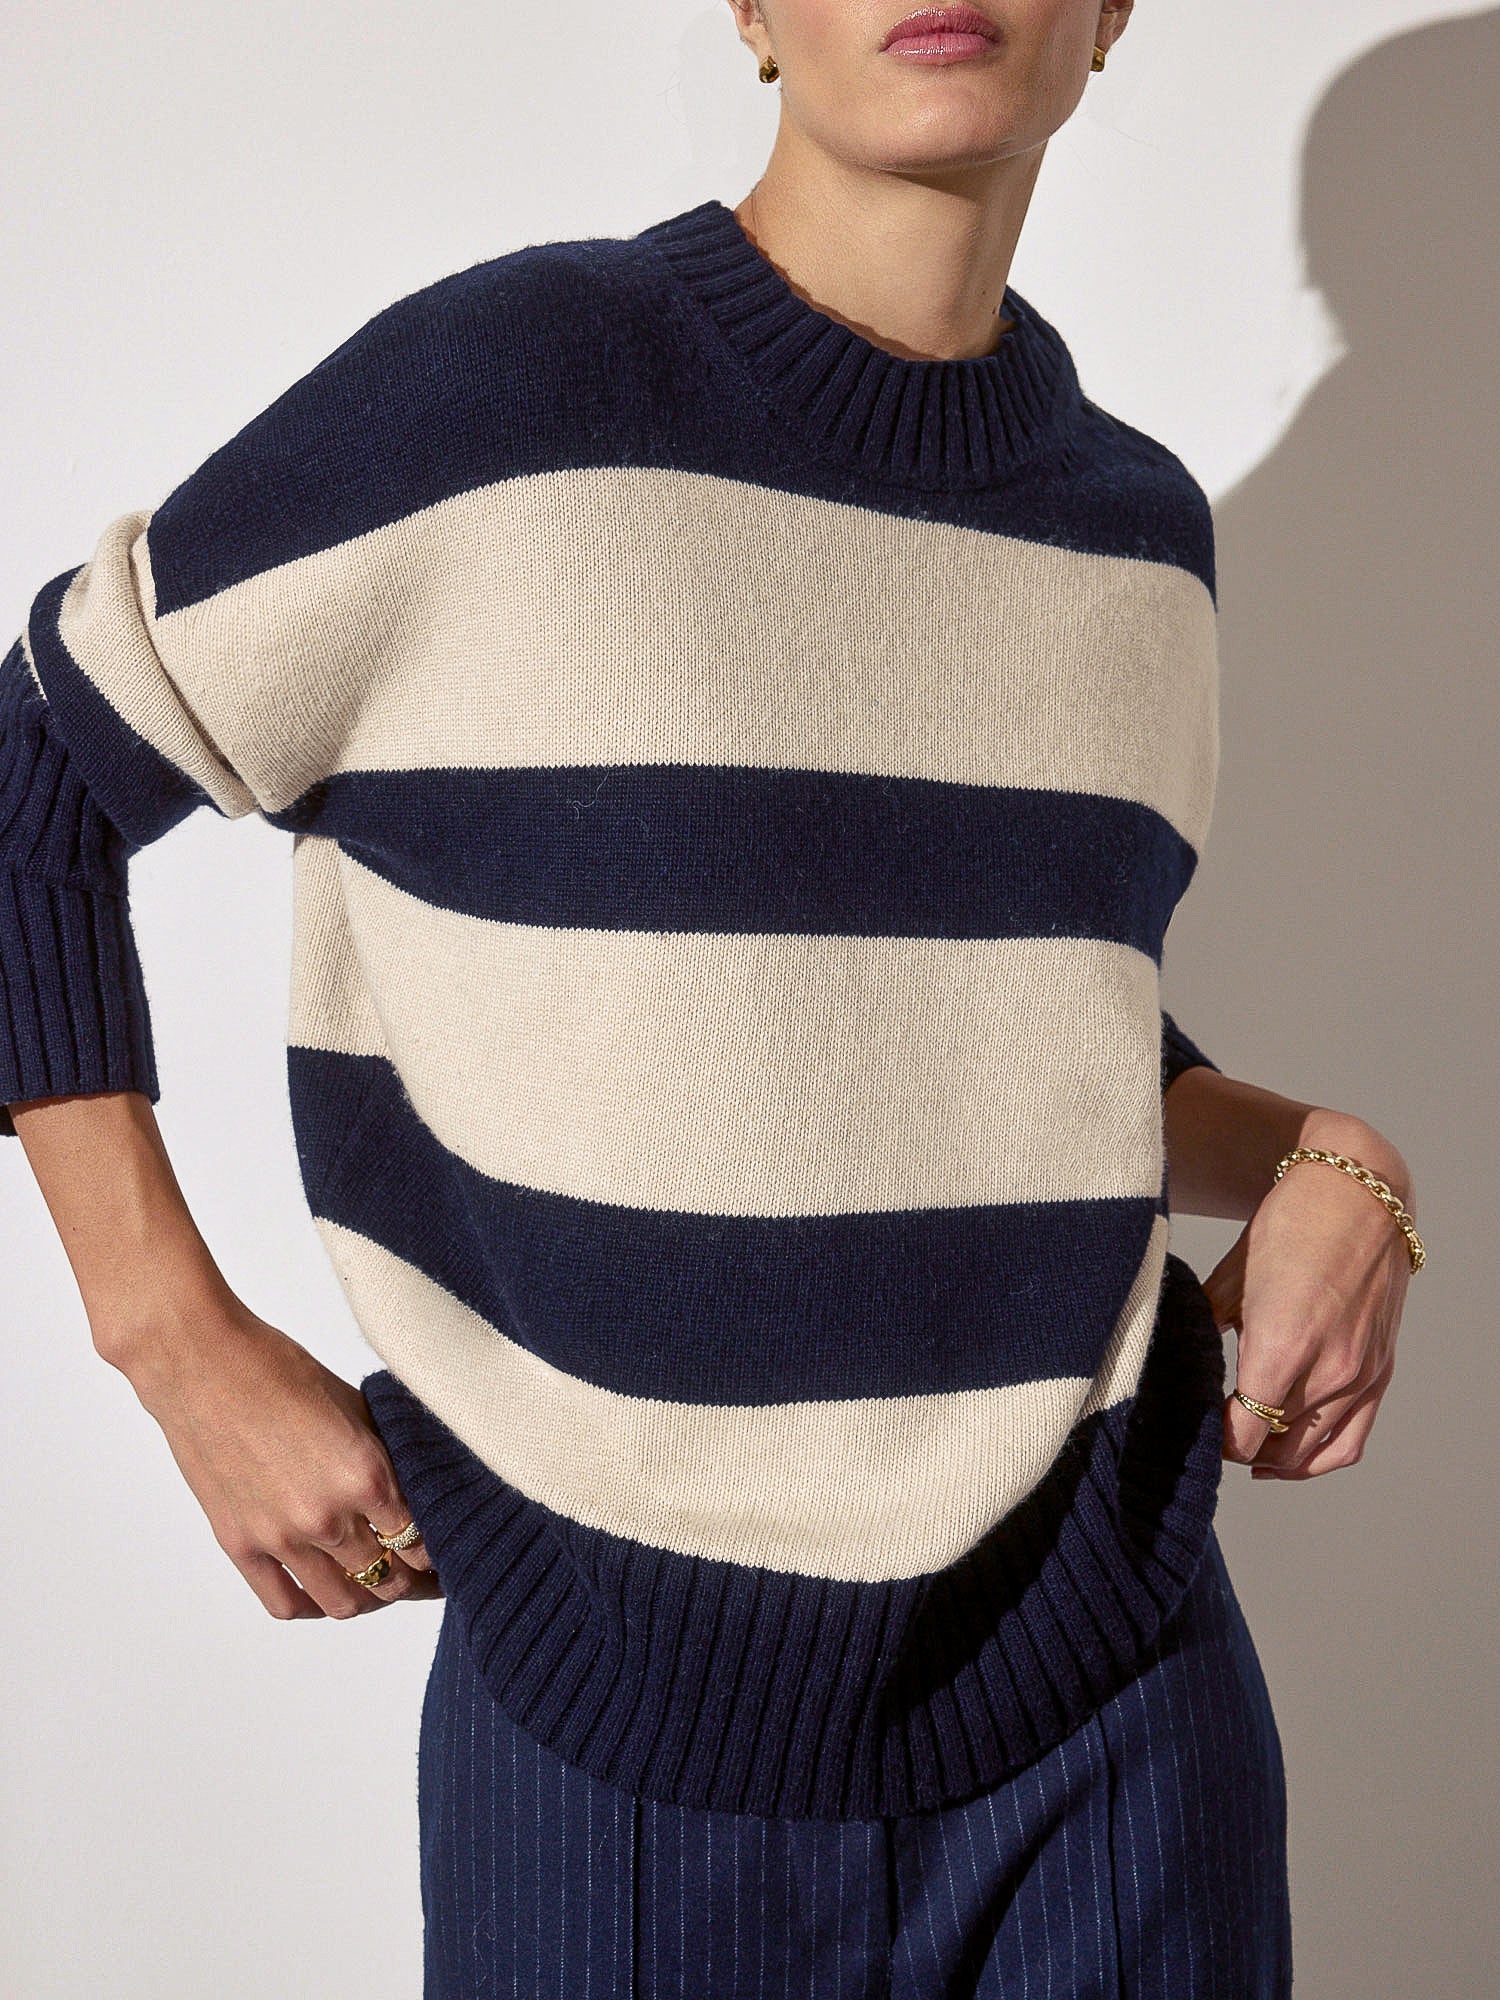 Cy navy and beige stripe crewneck sweater front view